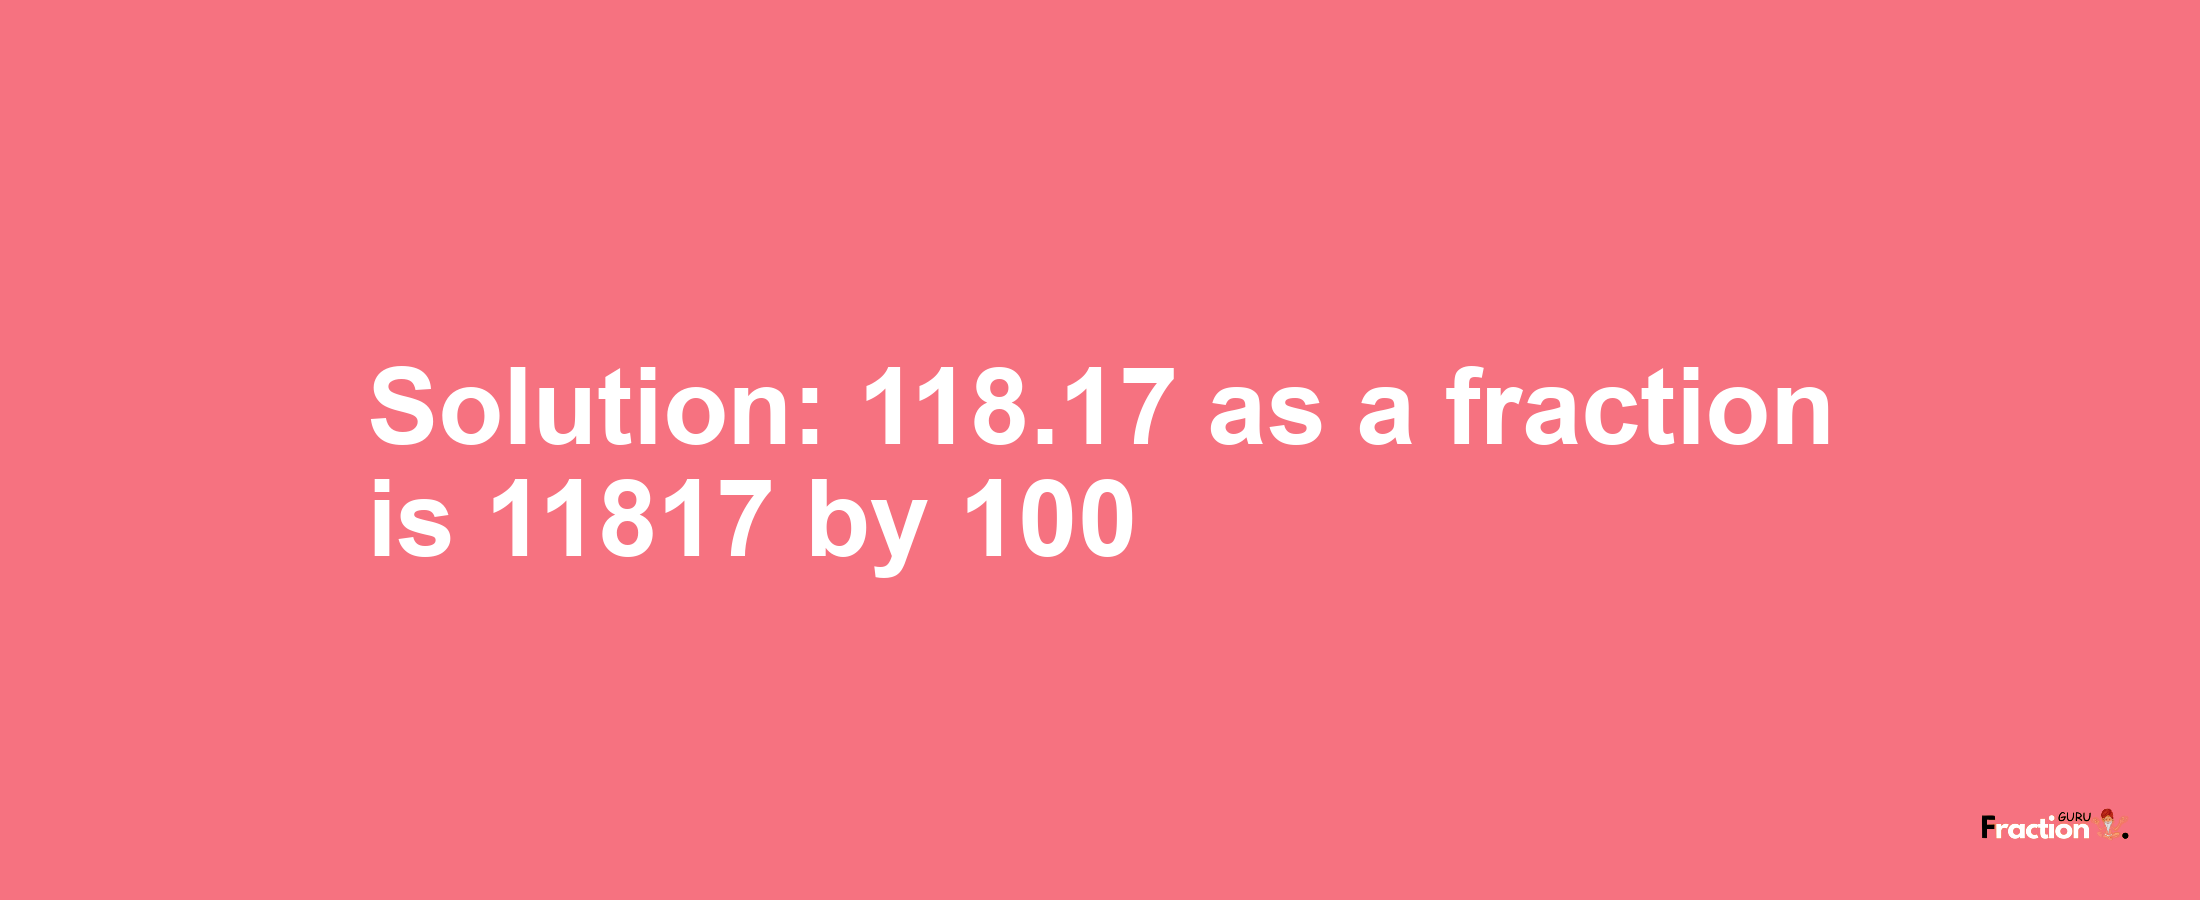 Solution:118.17 as a fraction is 11817/100